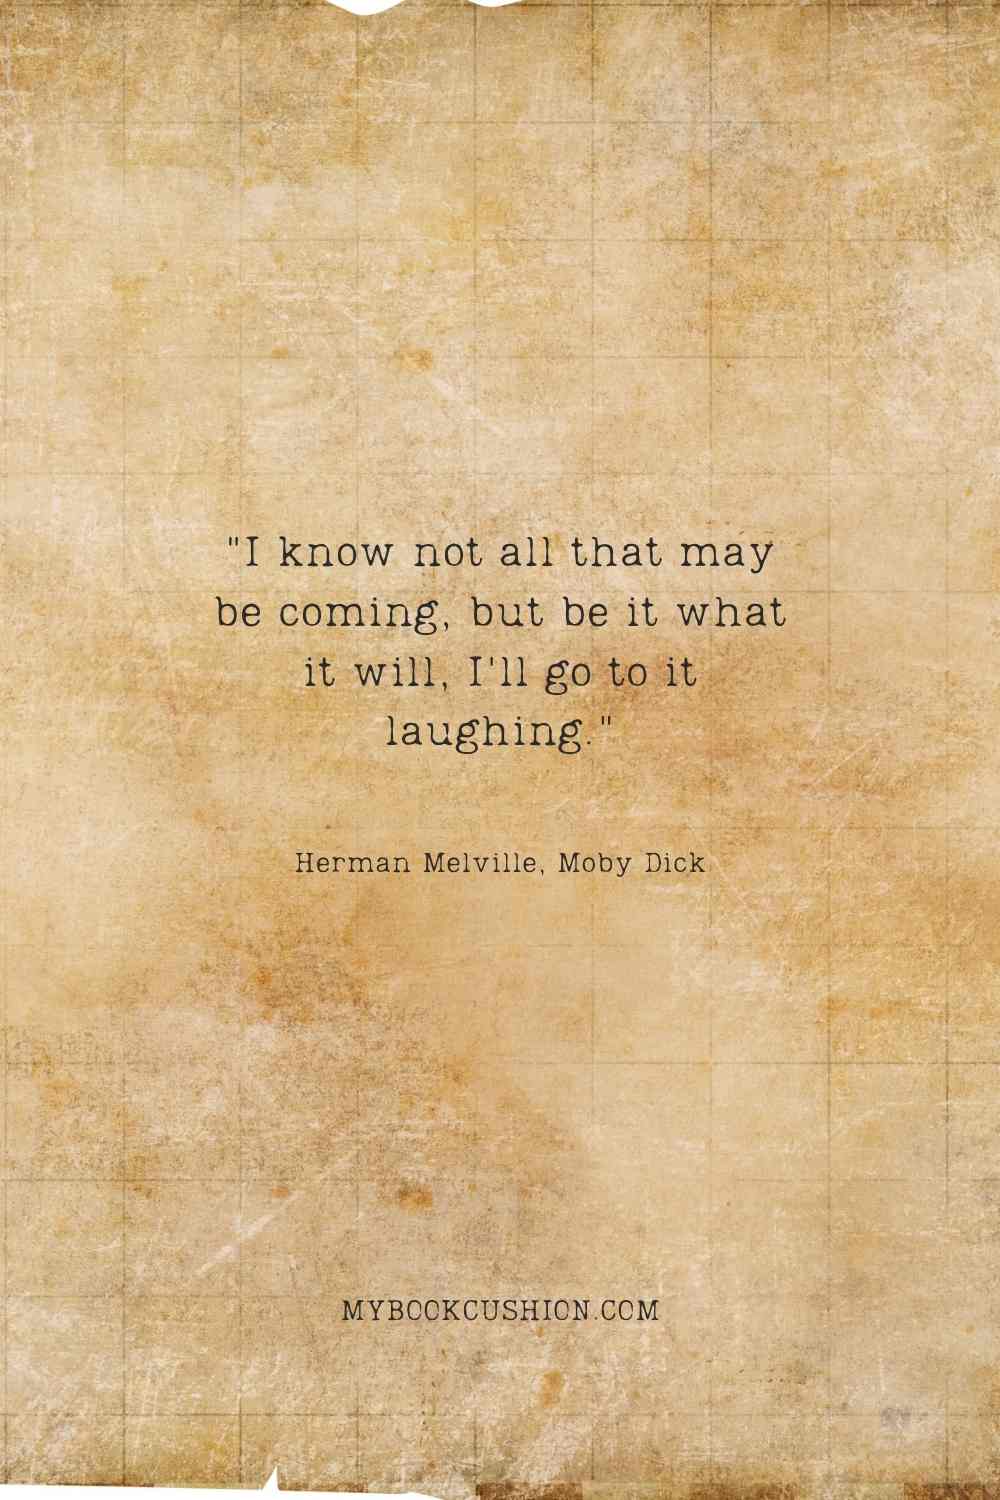 I know not all that may be coming, but be it what it will, I'll go to it laughing. - Herman Melville, Moby Dick